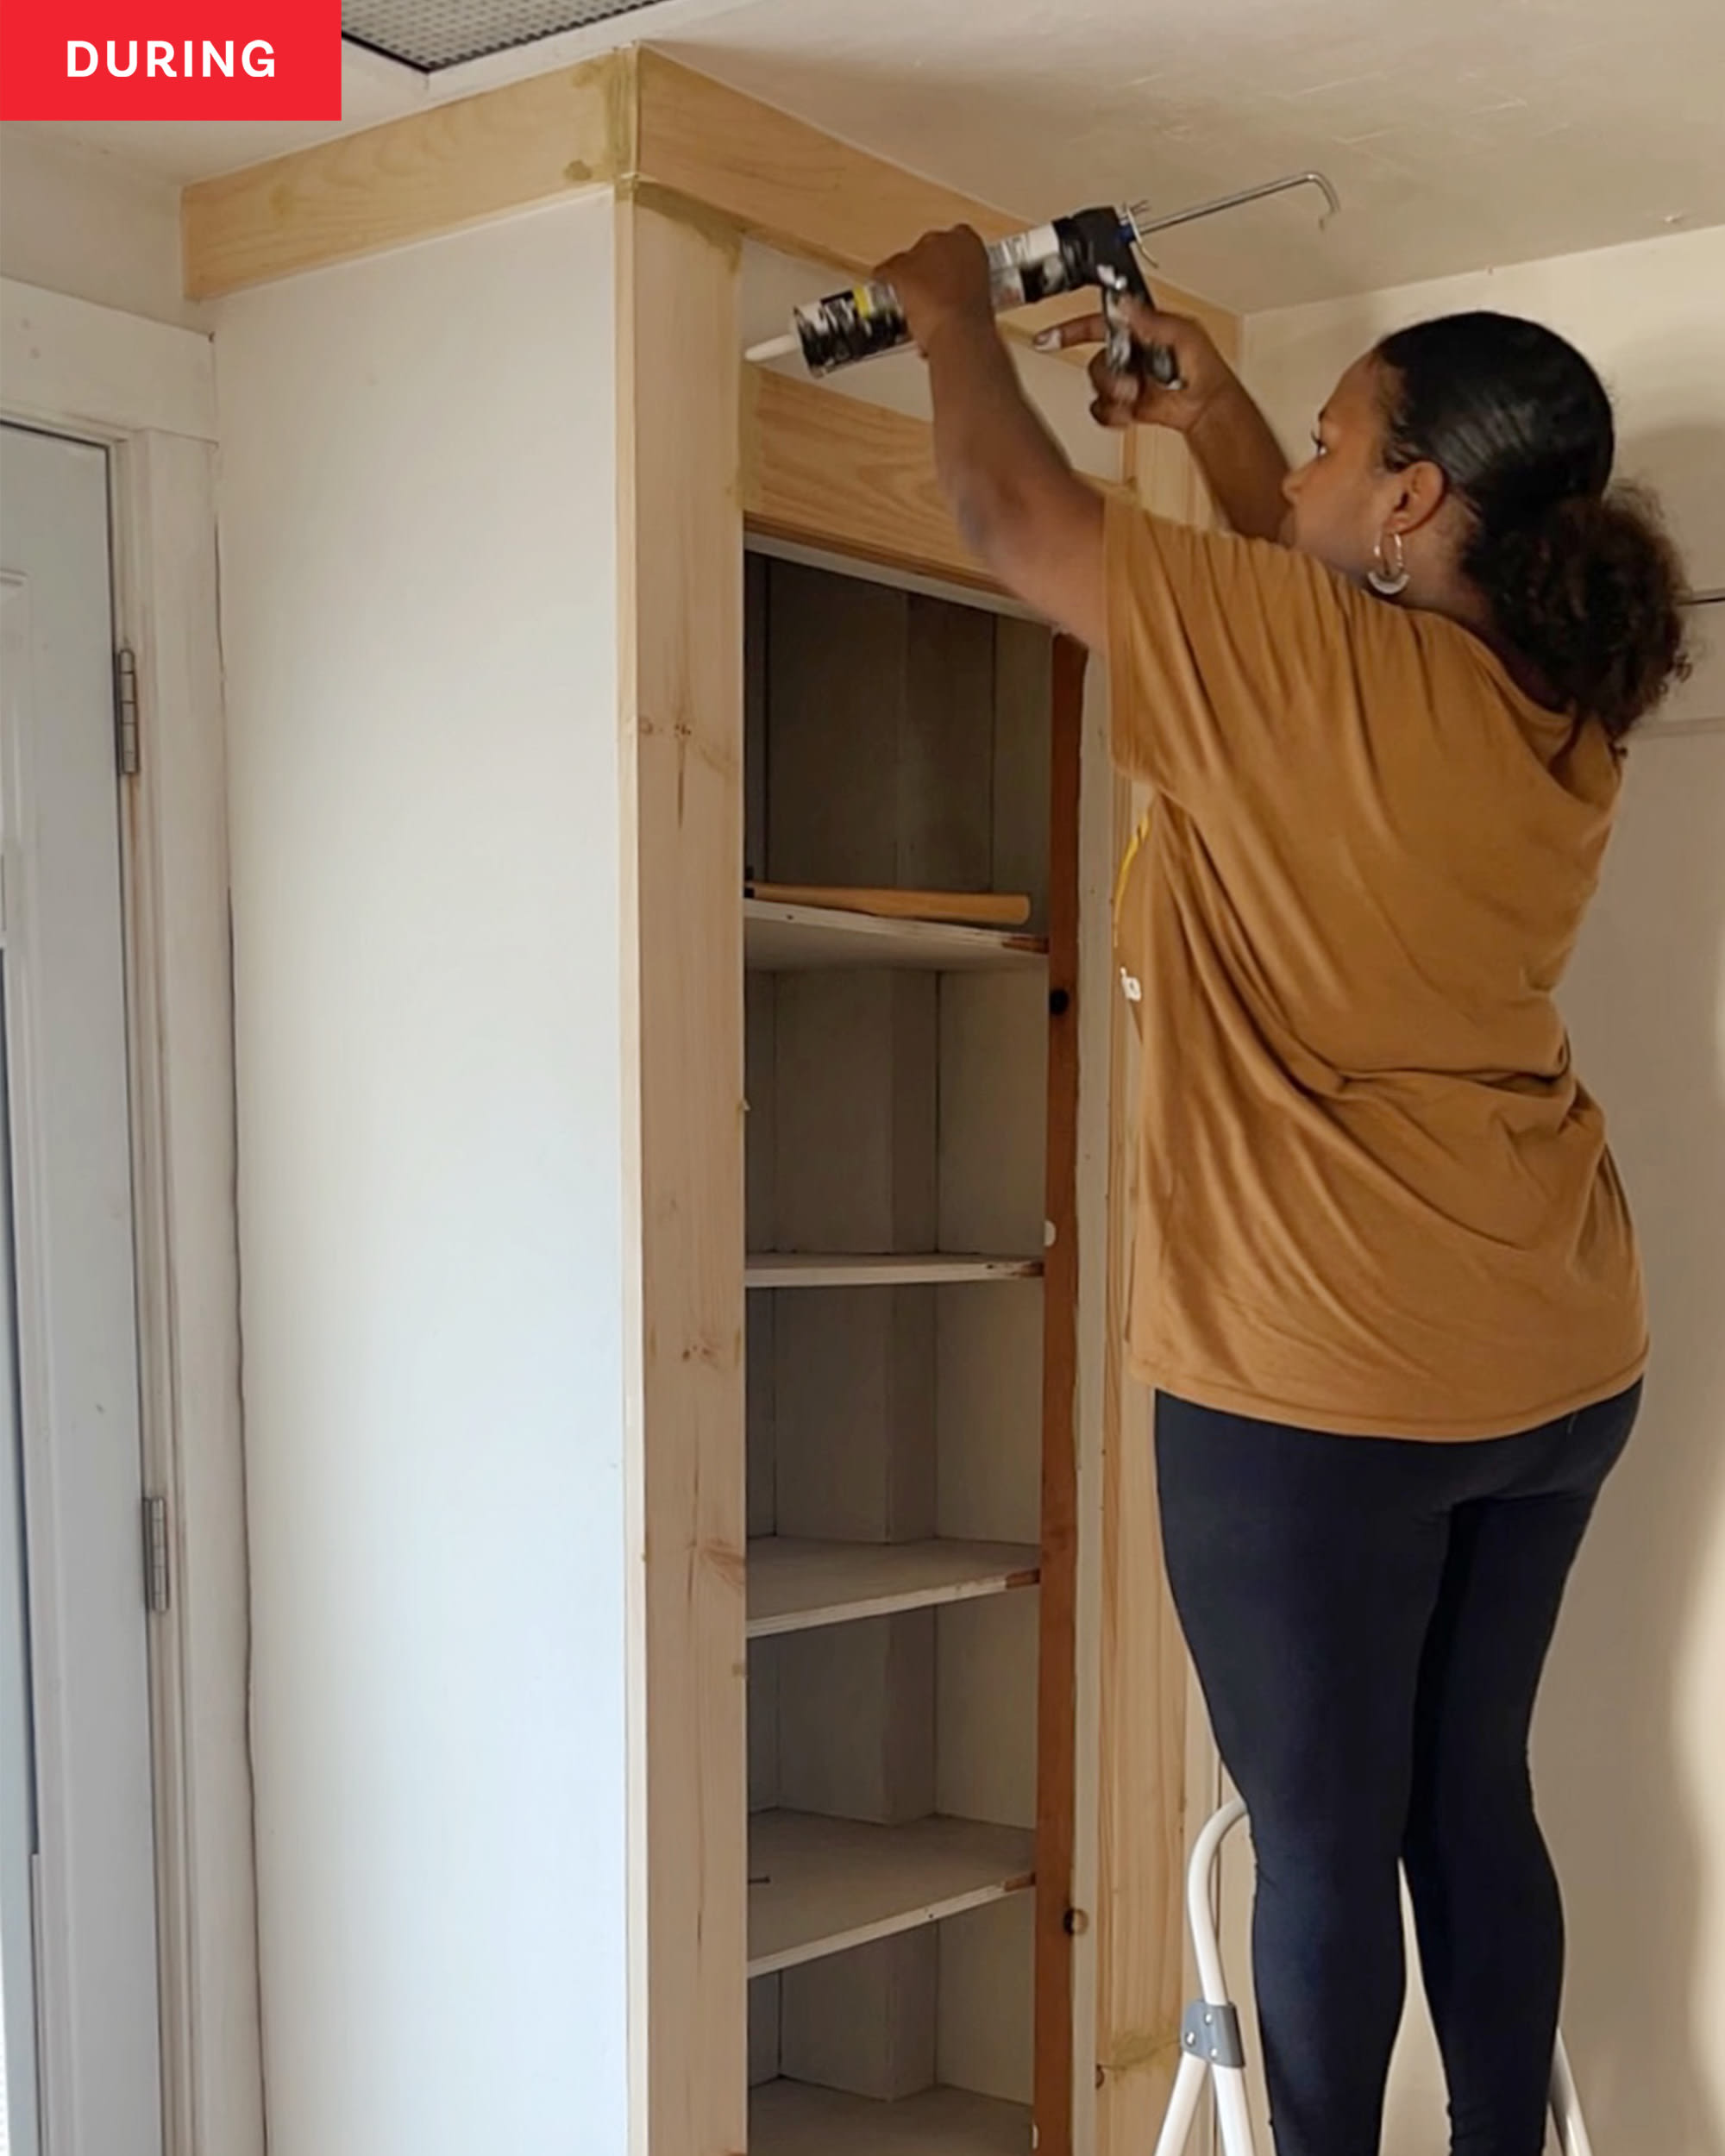 https://cdn.apartmenttherapy.info/image/upload/v1695240179/at/home-projects/2023-07/carli-diy-collective-closet-door/Before%20and%20After%20Images/carli-closet-during-13.jpg